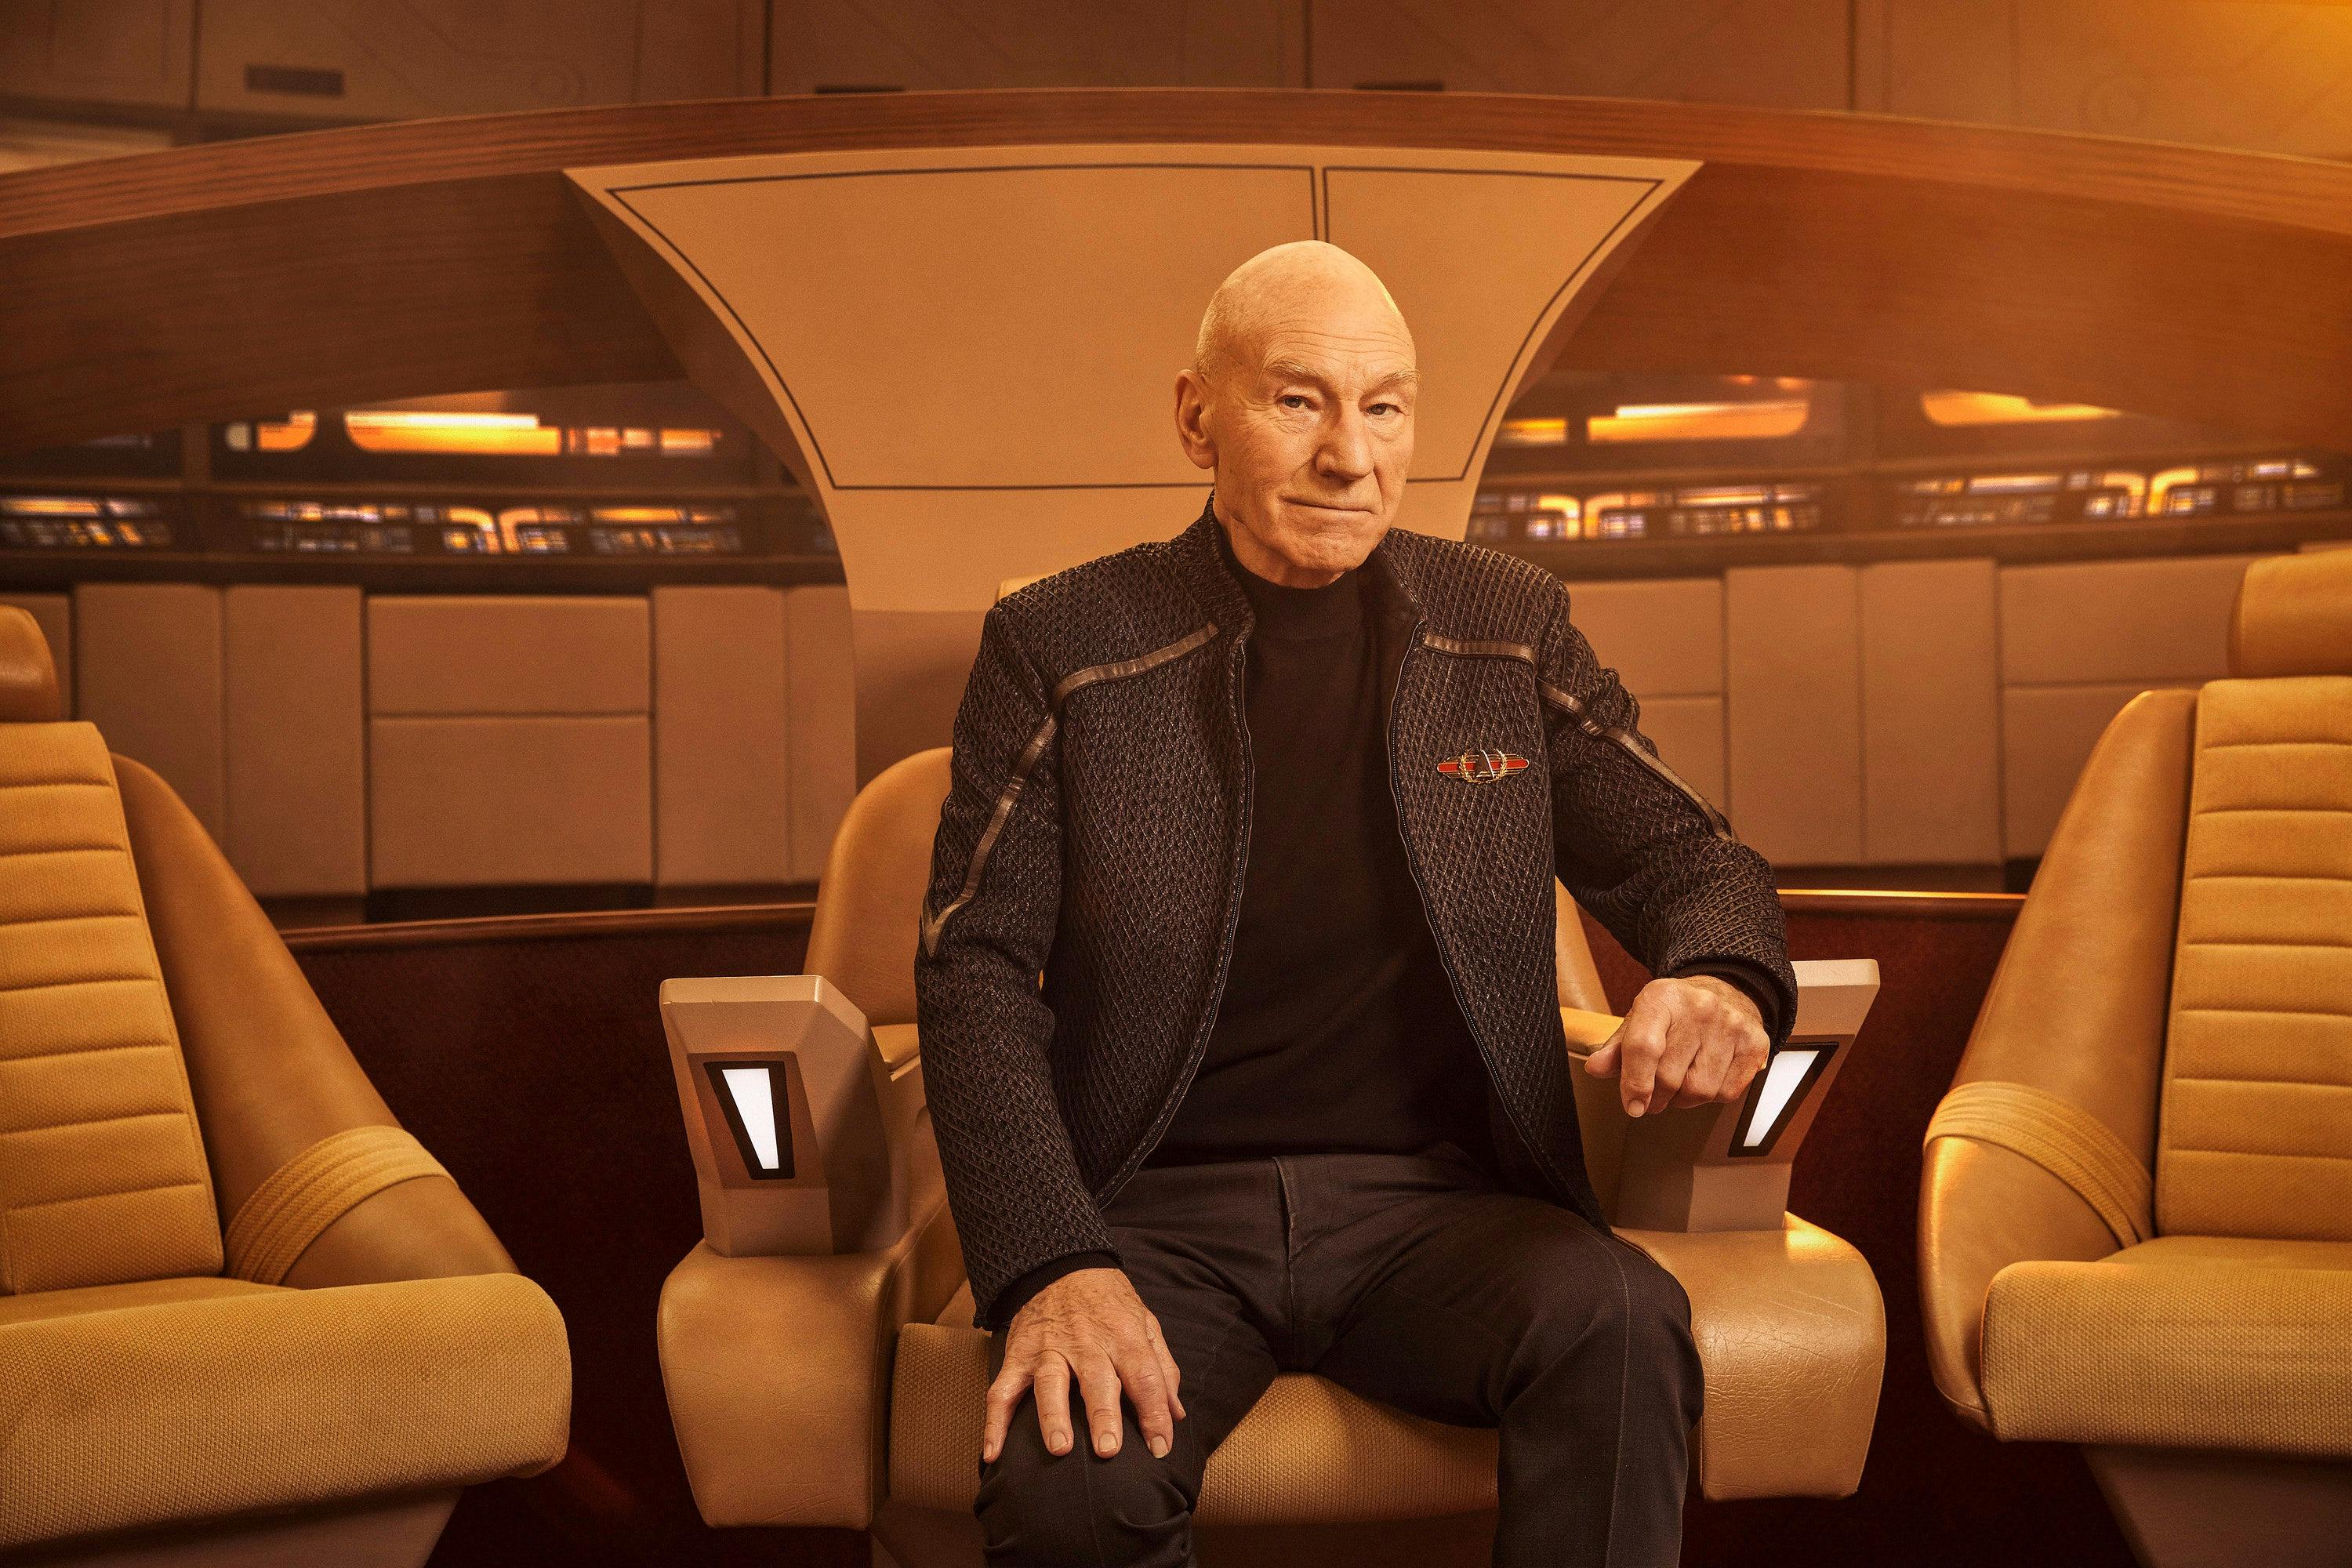 Jean-Luc Picard sits in the Captain's Chair on the bridge of the reconstructed Enteprise-D